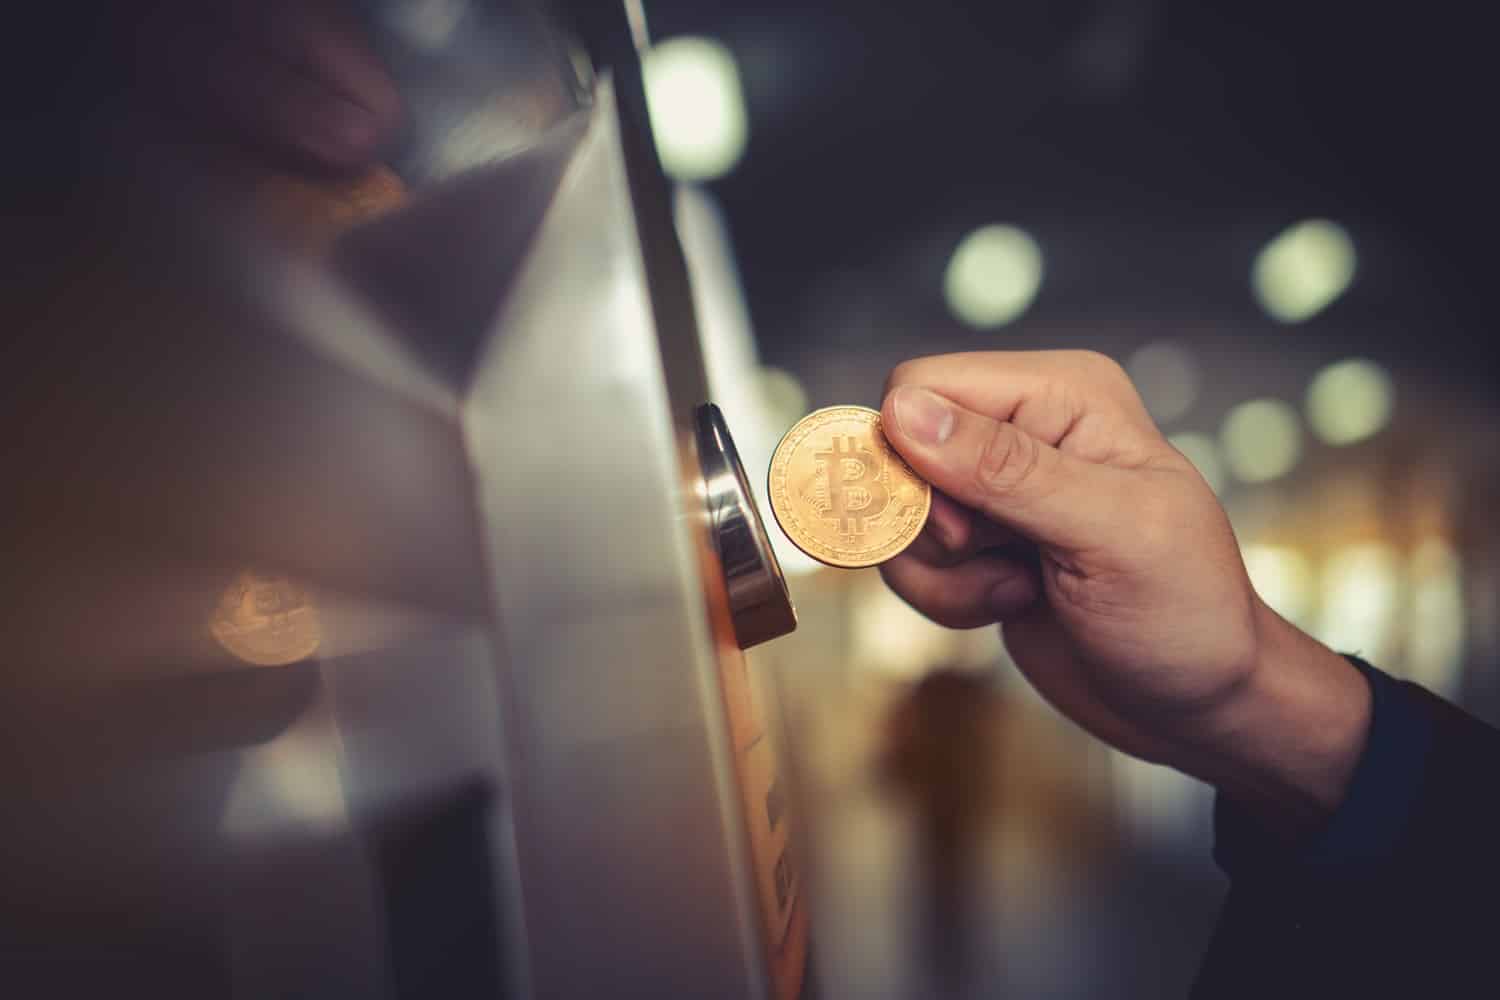 A person’s hand holds a metal coin intended to represent Bitcoin next to a machine with a coin slot.